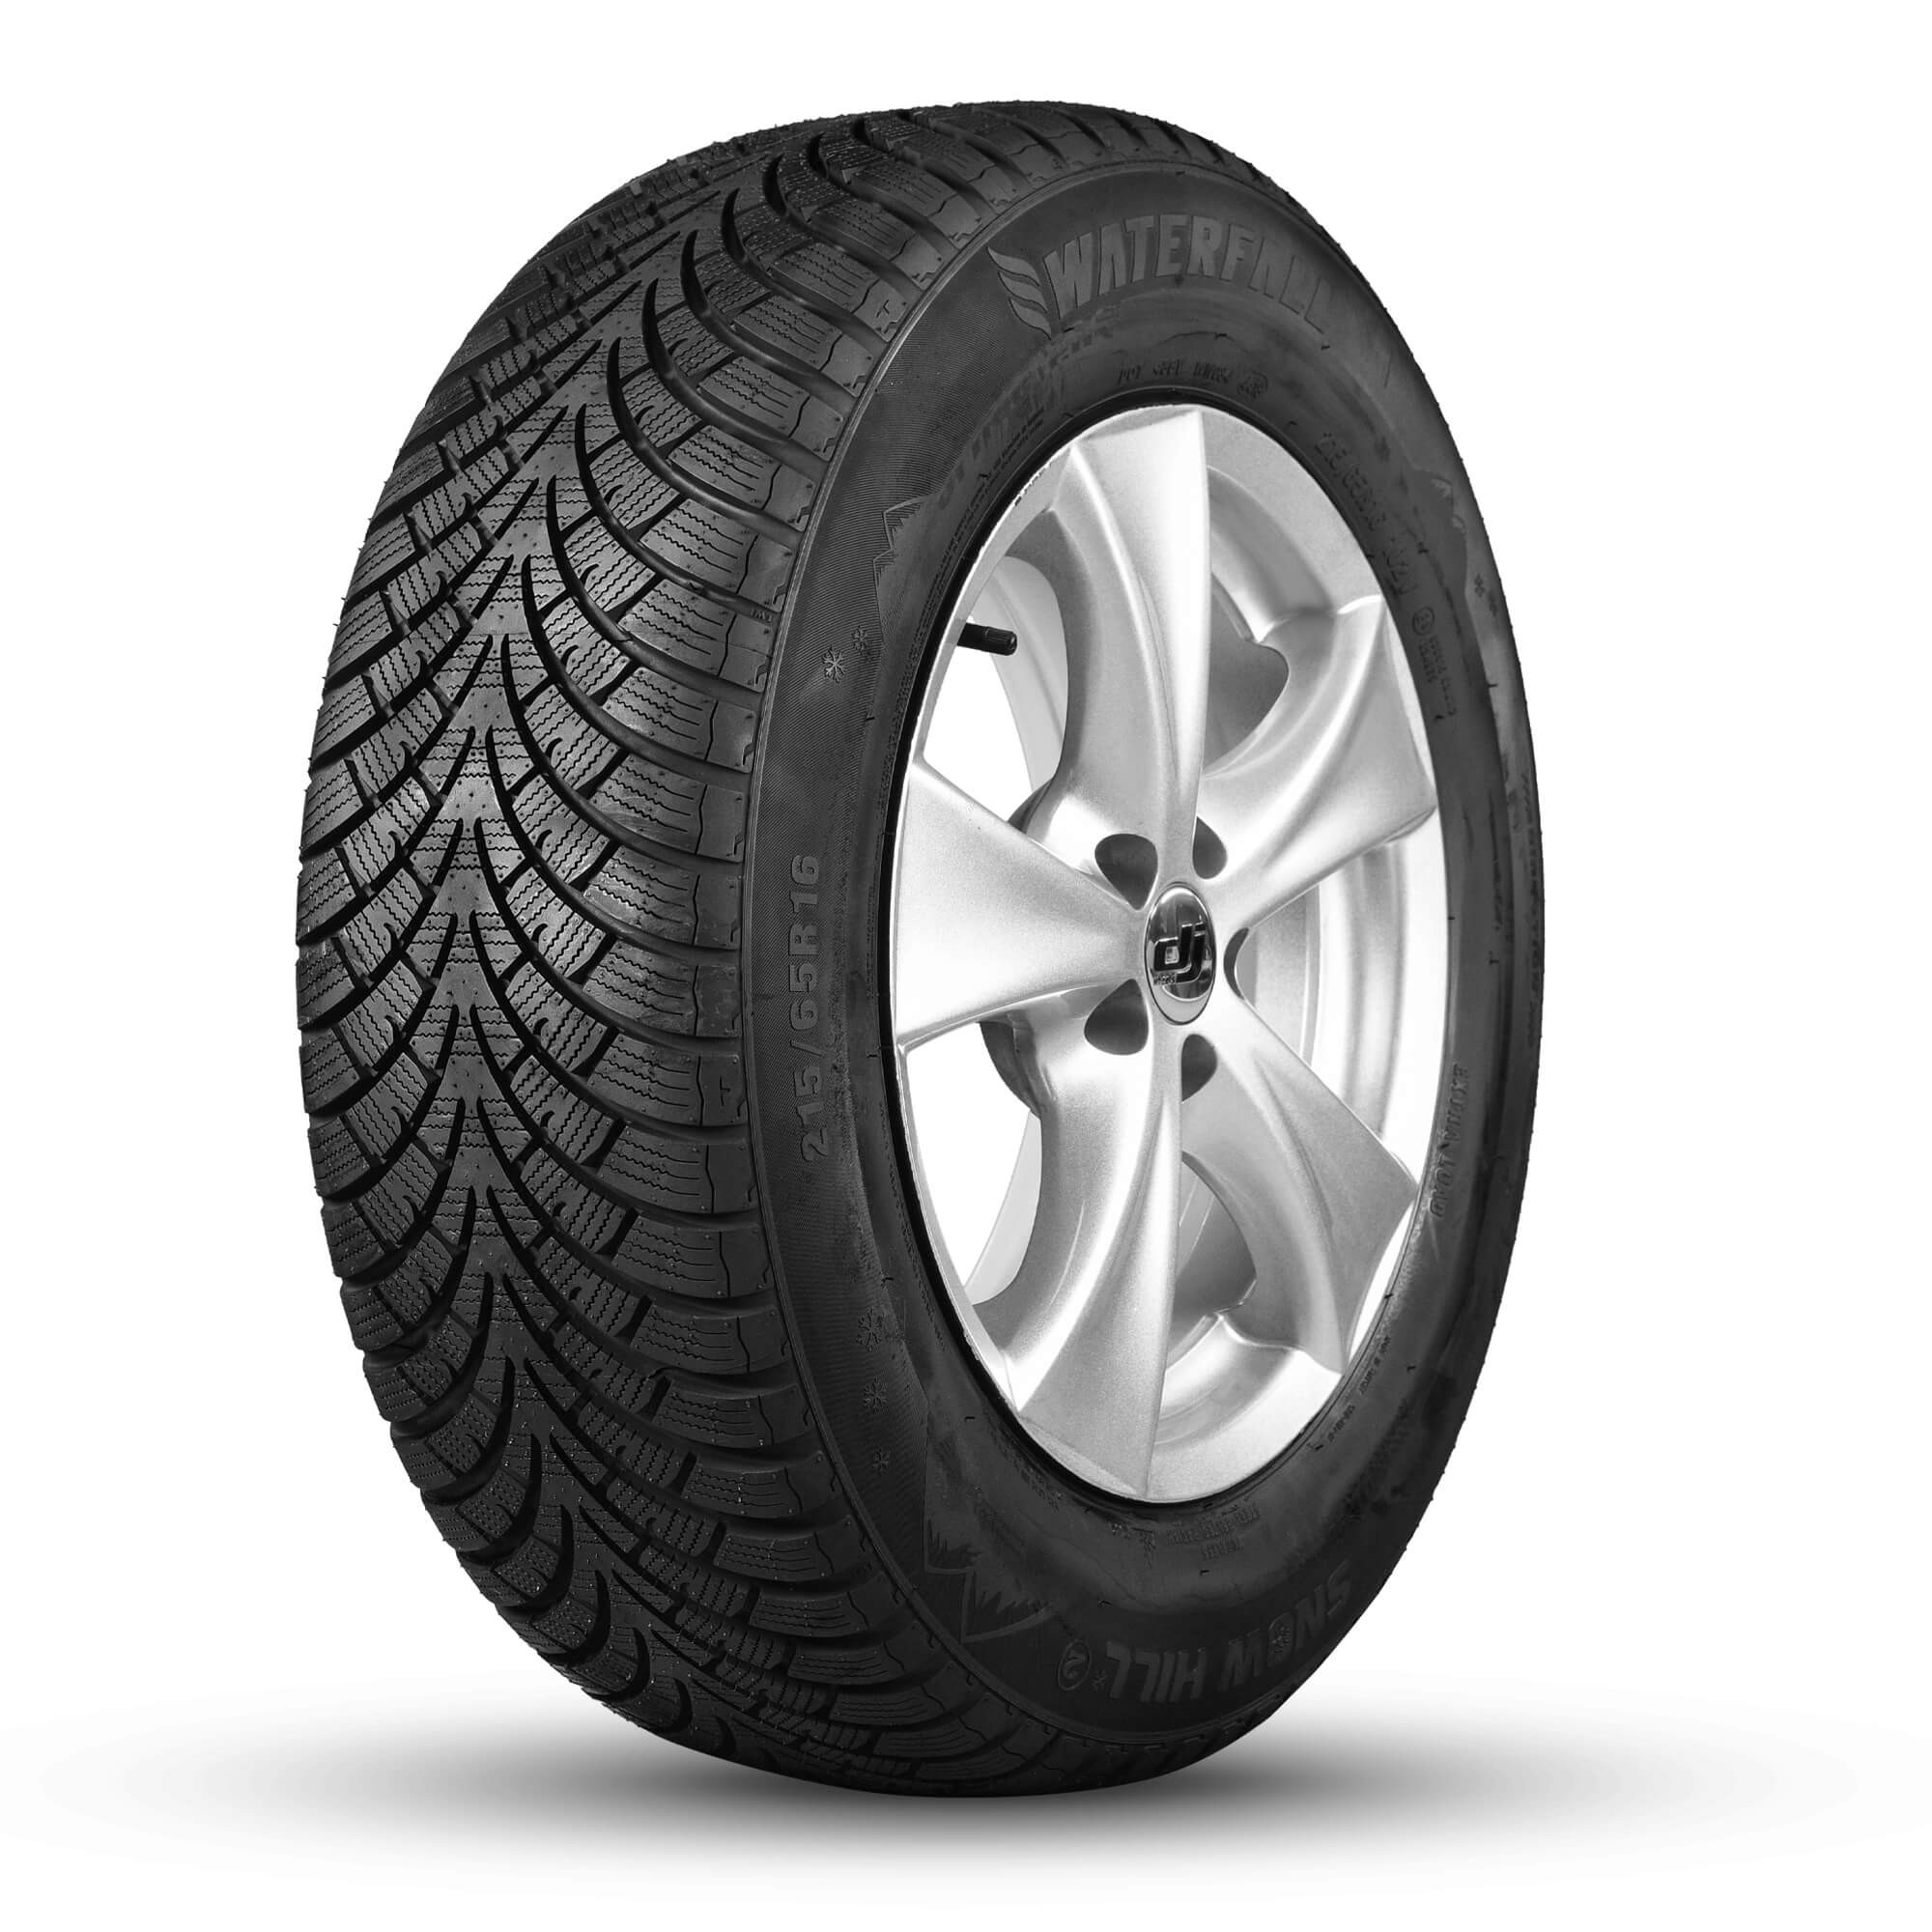 Gomme Nuove Waterfall 205/55 R16 94H SNOW HILL 3 M+S pneumatici nuovi Invernale